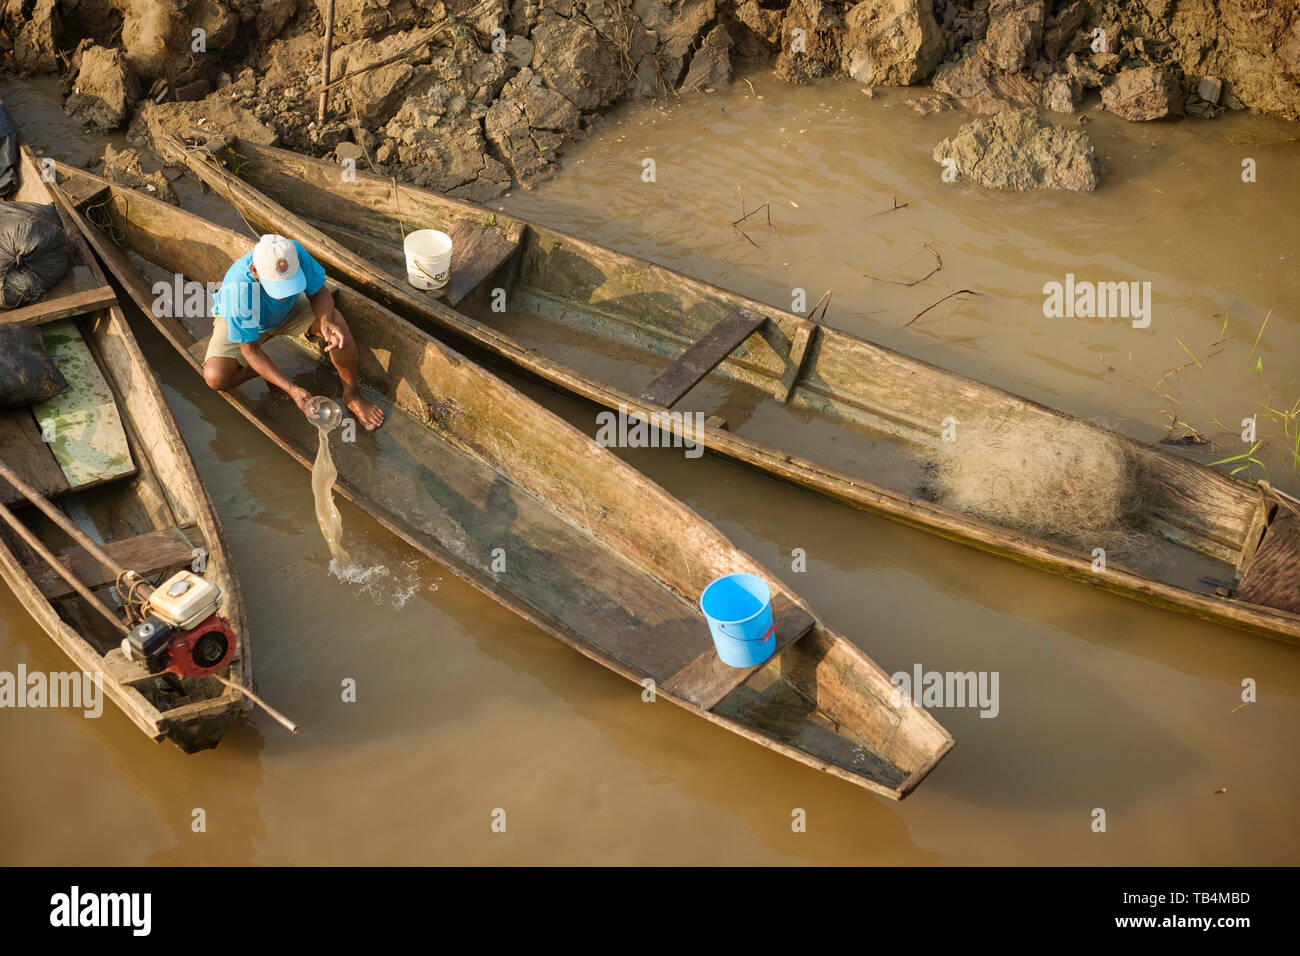 Man bailing water from his wooden boat docked on the riverbank of the Ucayali River, Peruvian Amazon Basin, Loreto Department, Peru Stock Photo